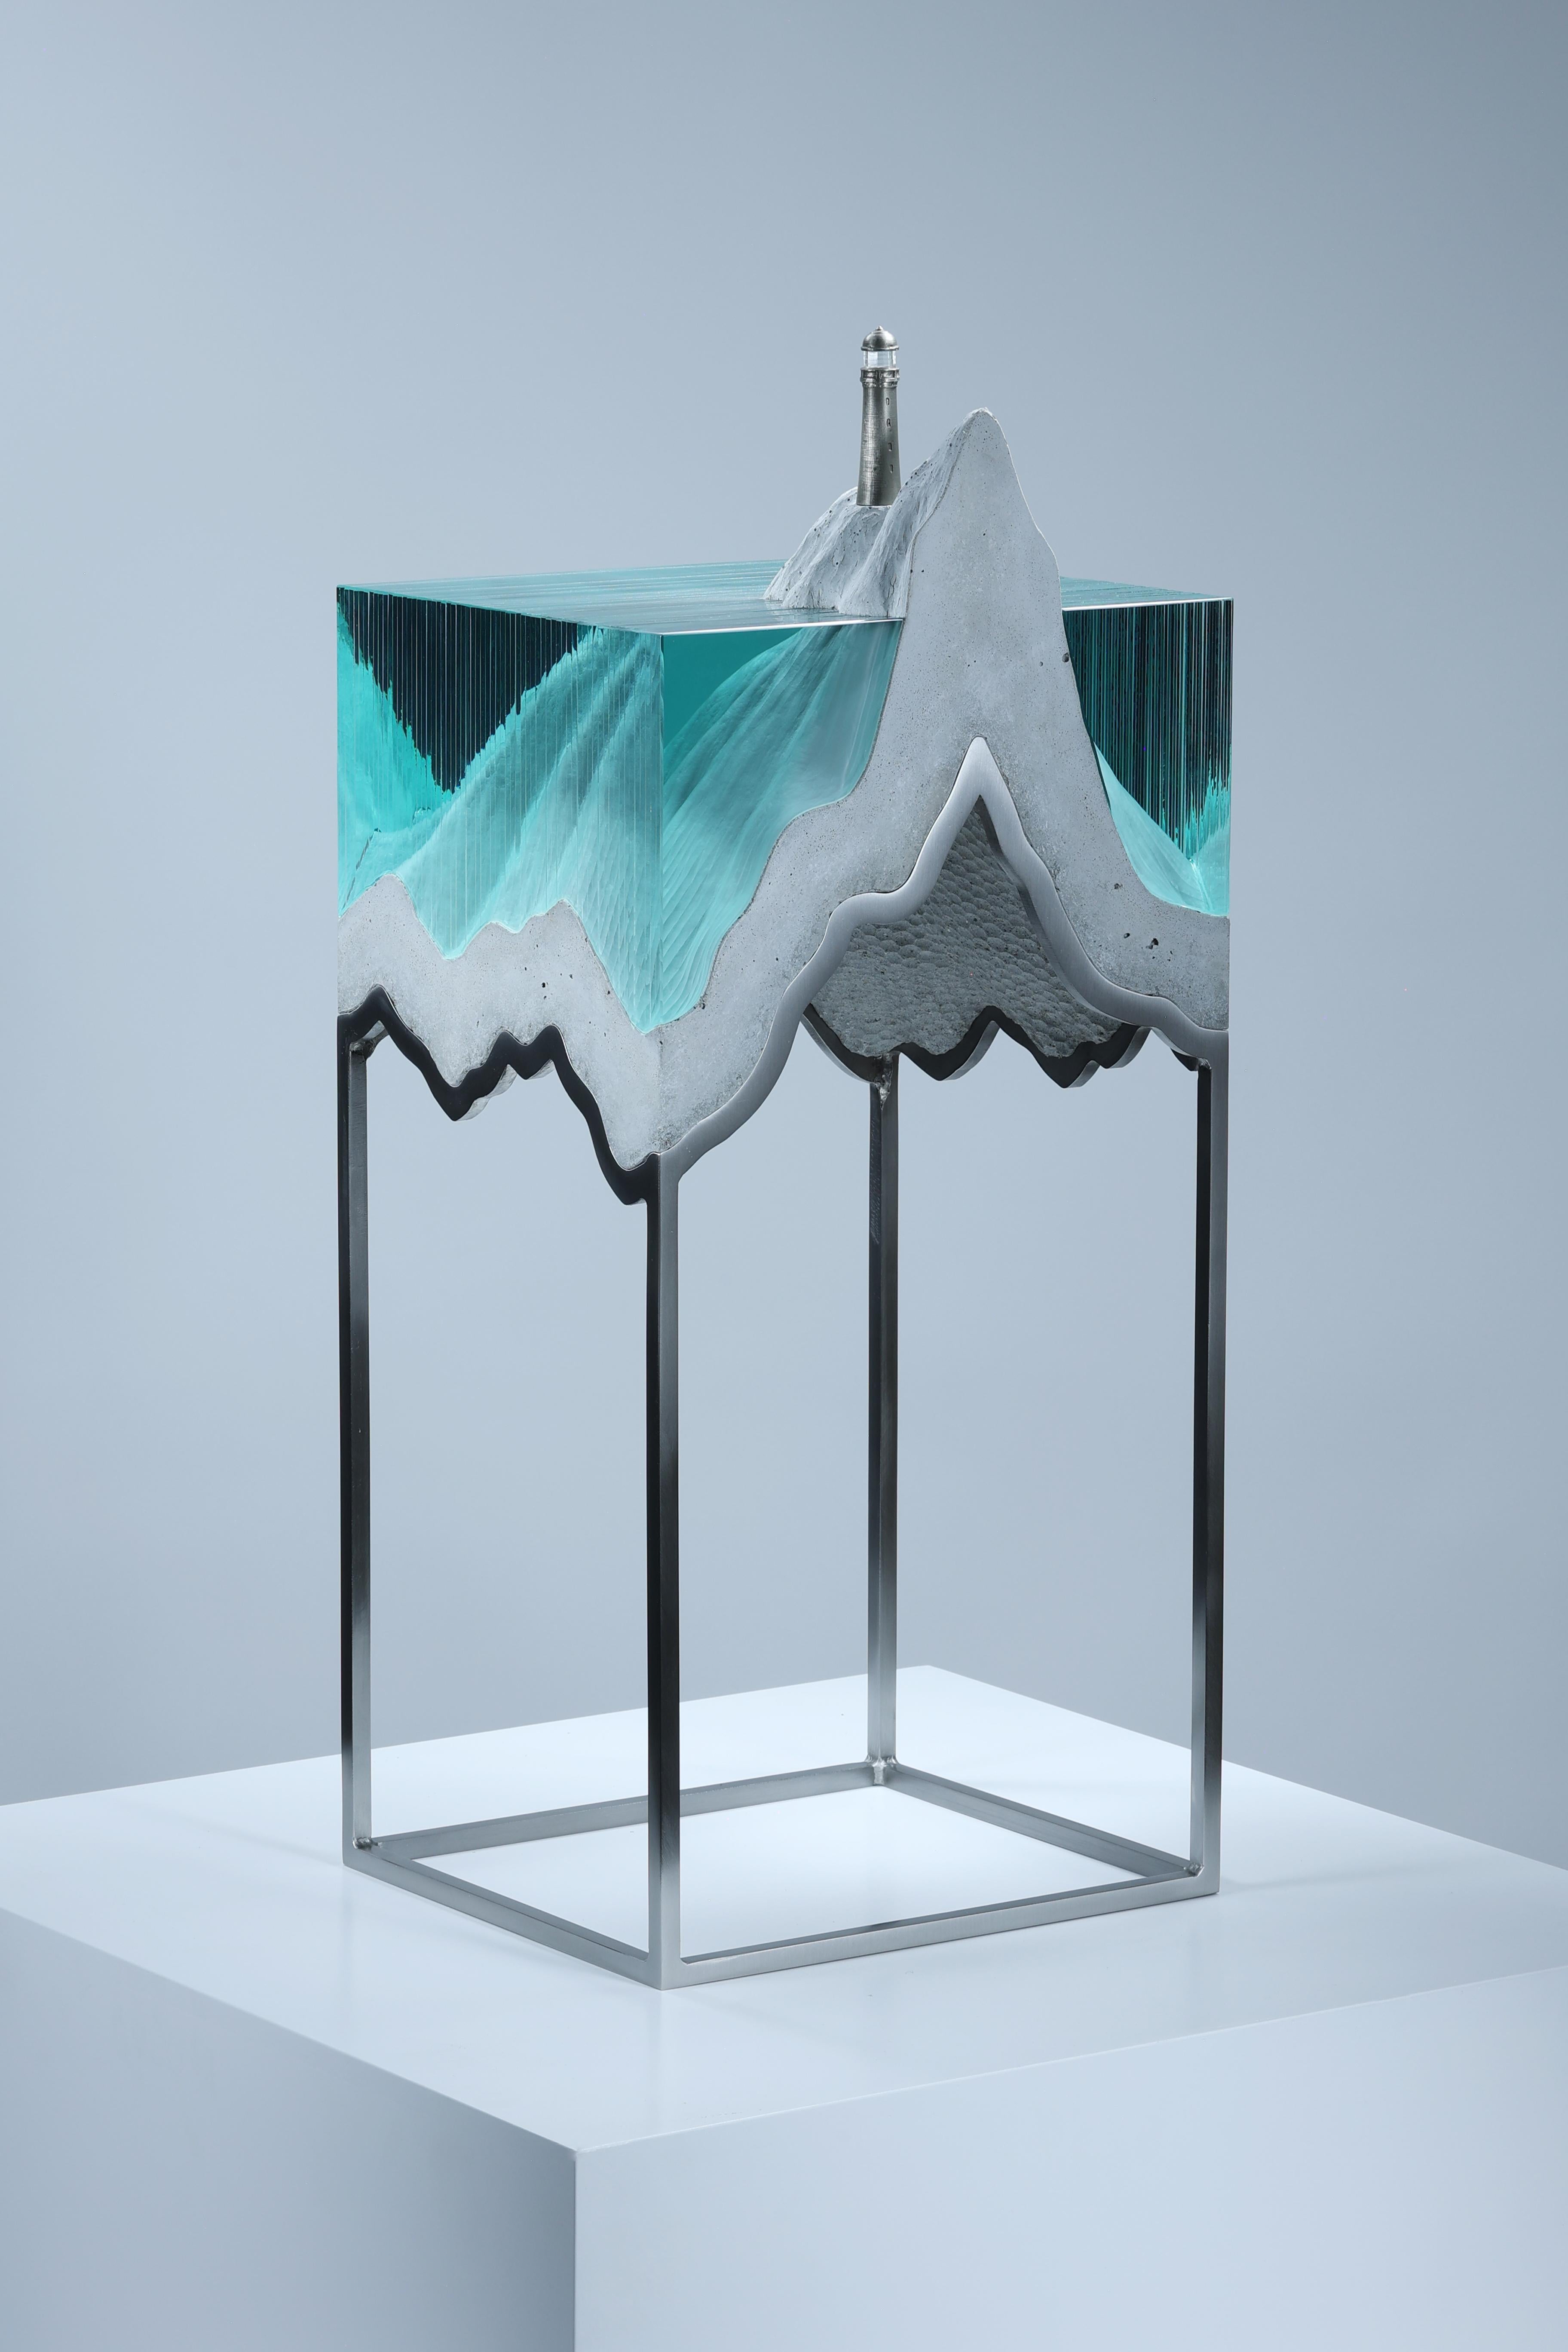 Ben Young’s sculpture fluidly blends glass, concrete, bronze, steel, and light to depict romantic and pensive imagery highlighting the fragility of our climate and its most precious resource – water. Born in Australia and raised in New Zealand,